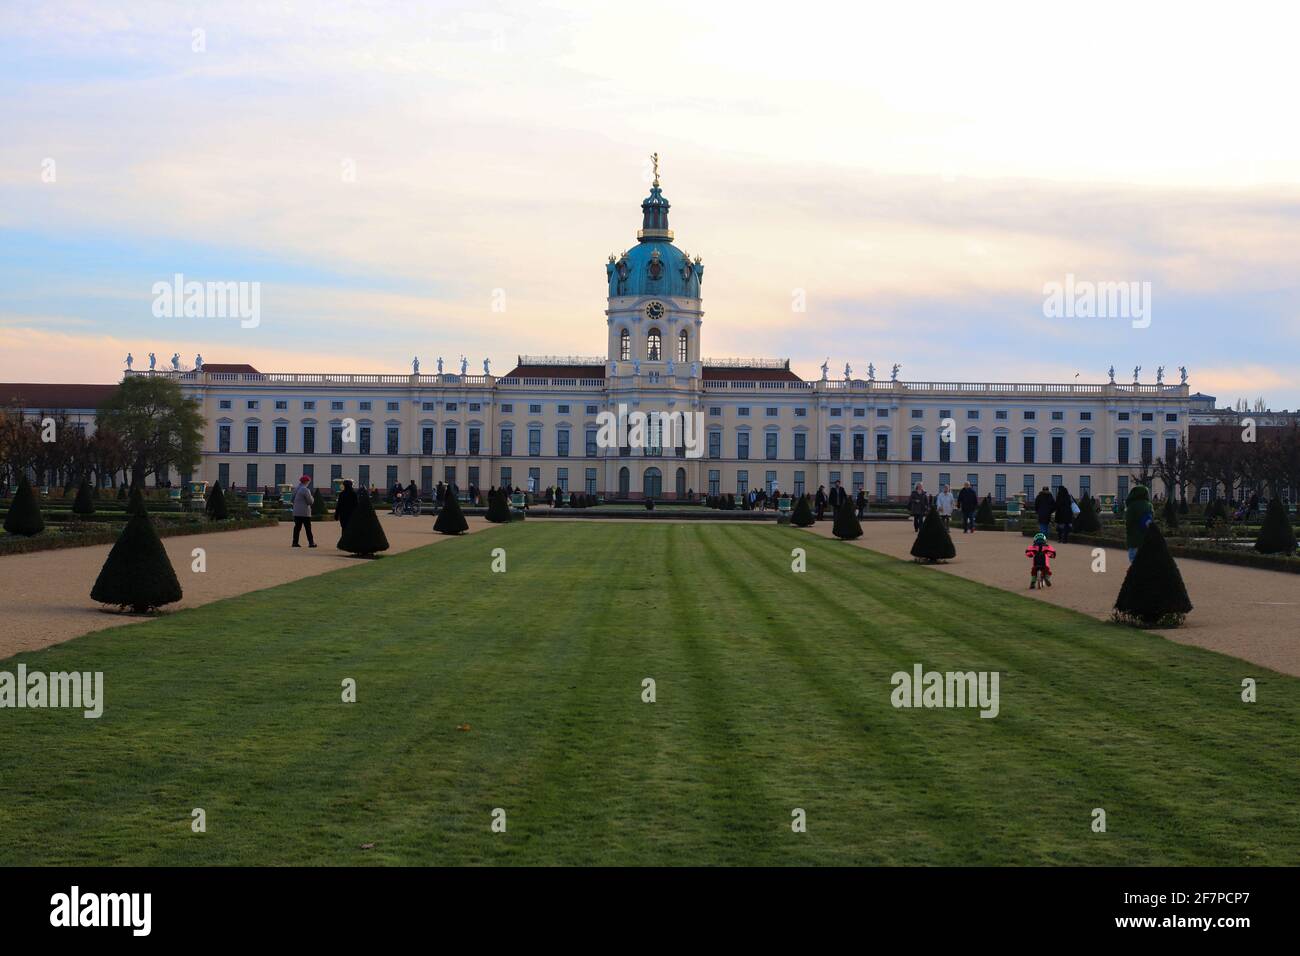 BERLIN, GERMANY - DECEMBER 06, 2020: Schloss Charlottenburg (Charlottenburg Palace) in Berlin. It is the largest palace and the only surviving royal r Stock Photo